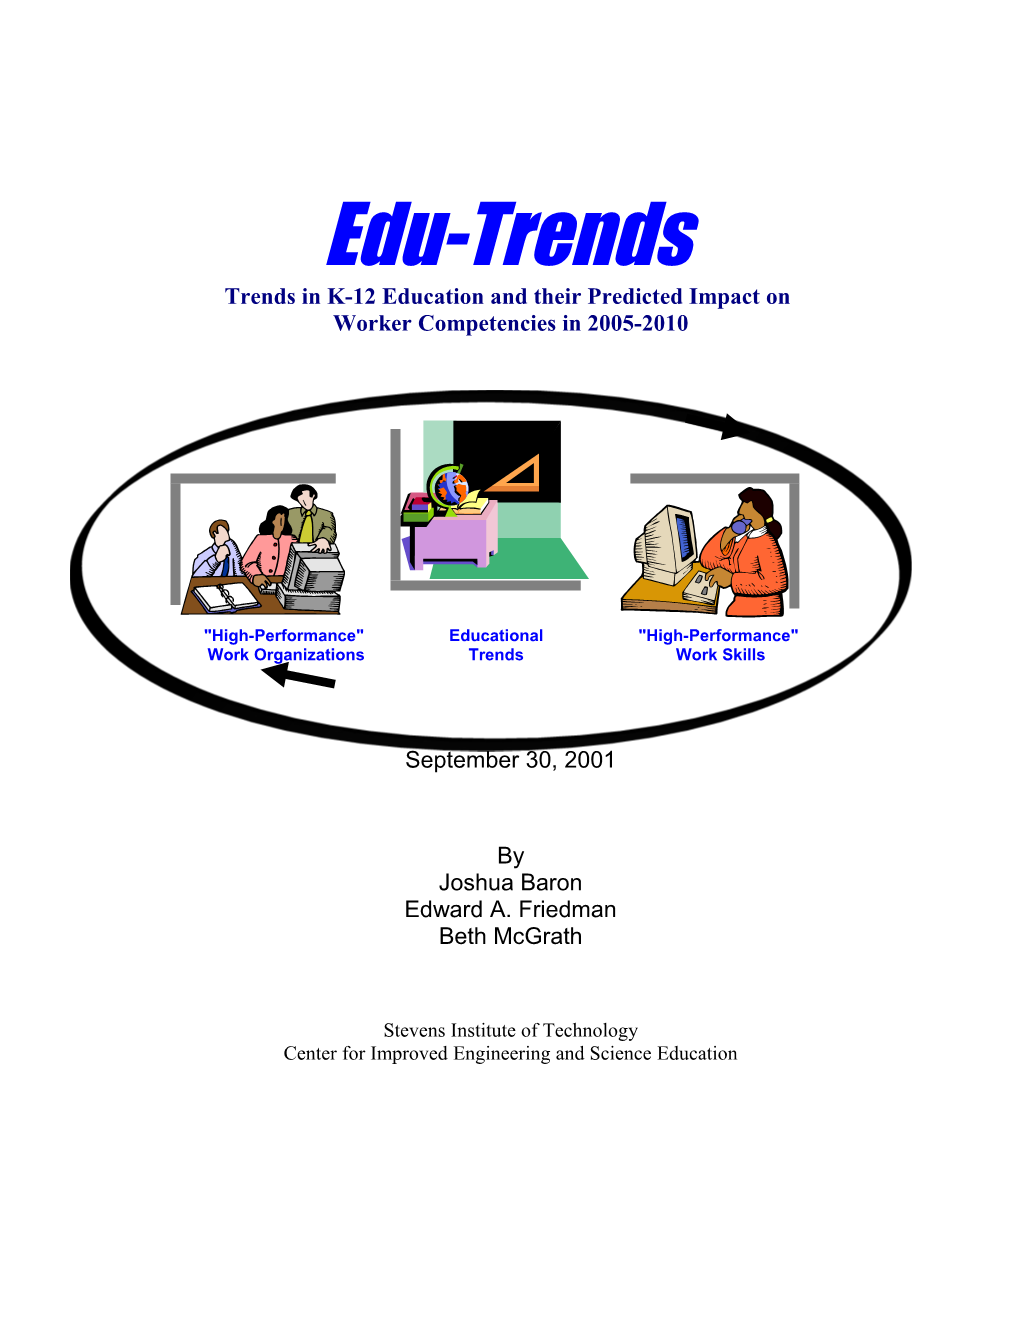 Trends in K-12 Education and Their Predicted Impact On